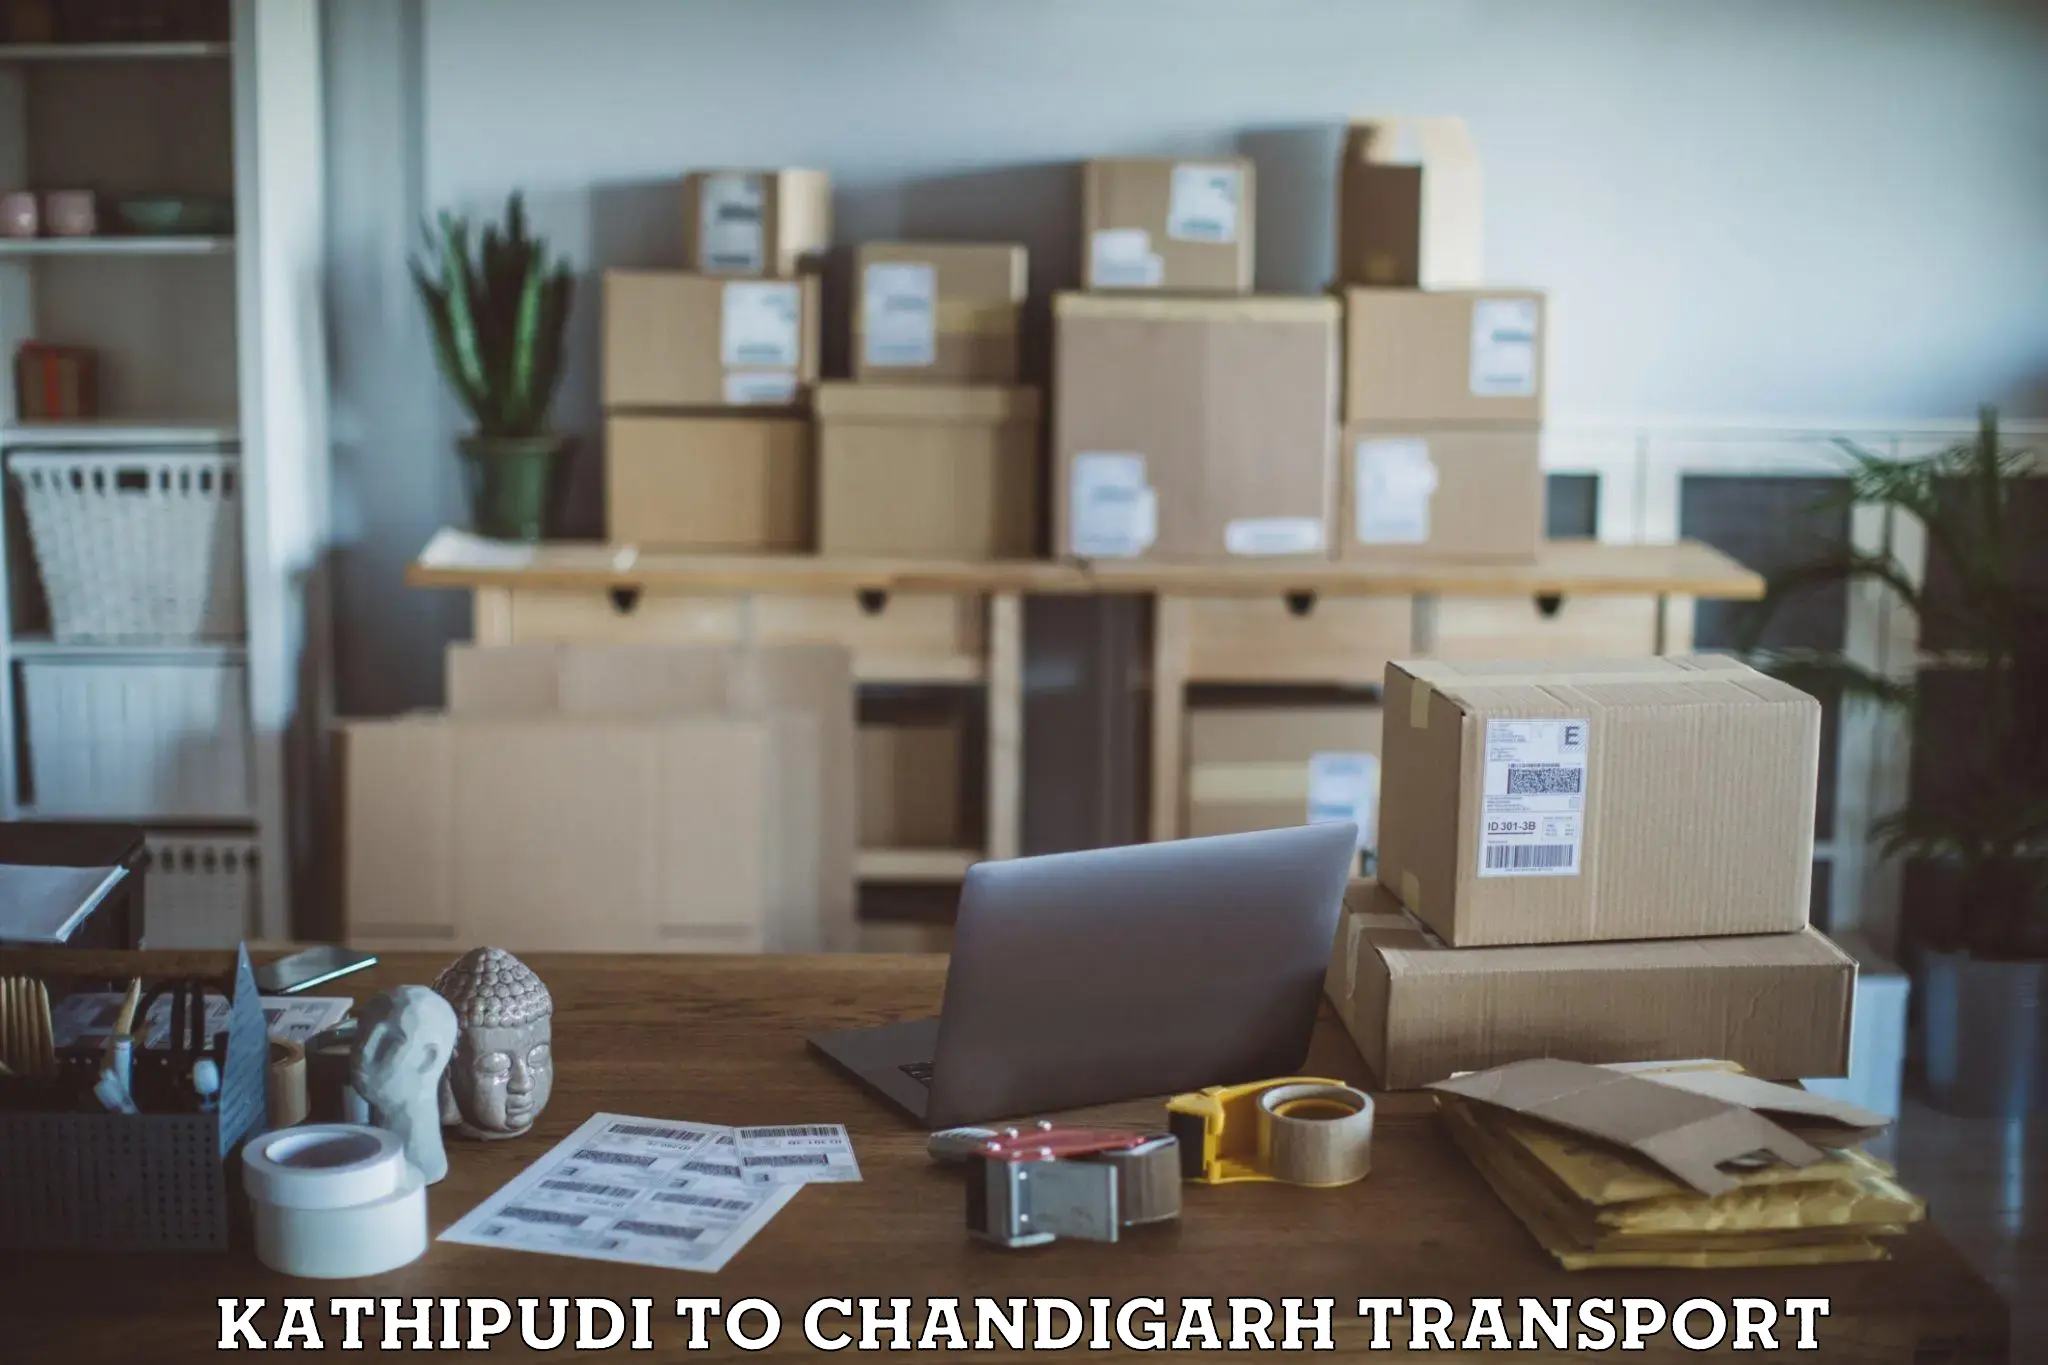 Daily transport service Kathipudi to Chandigarh